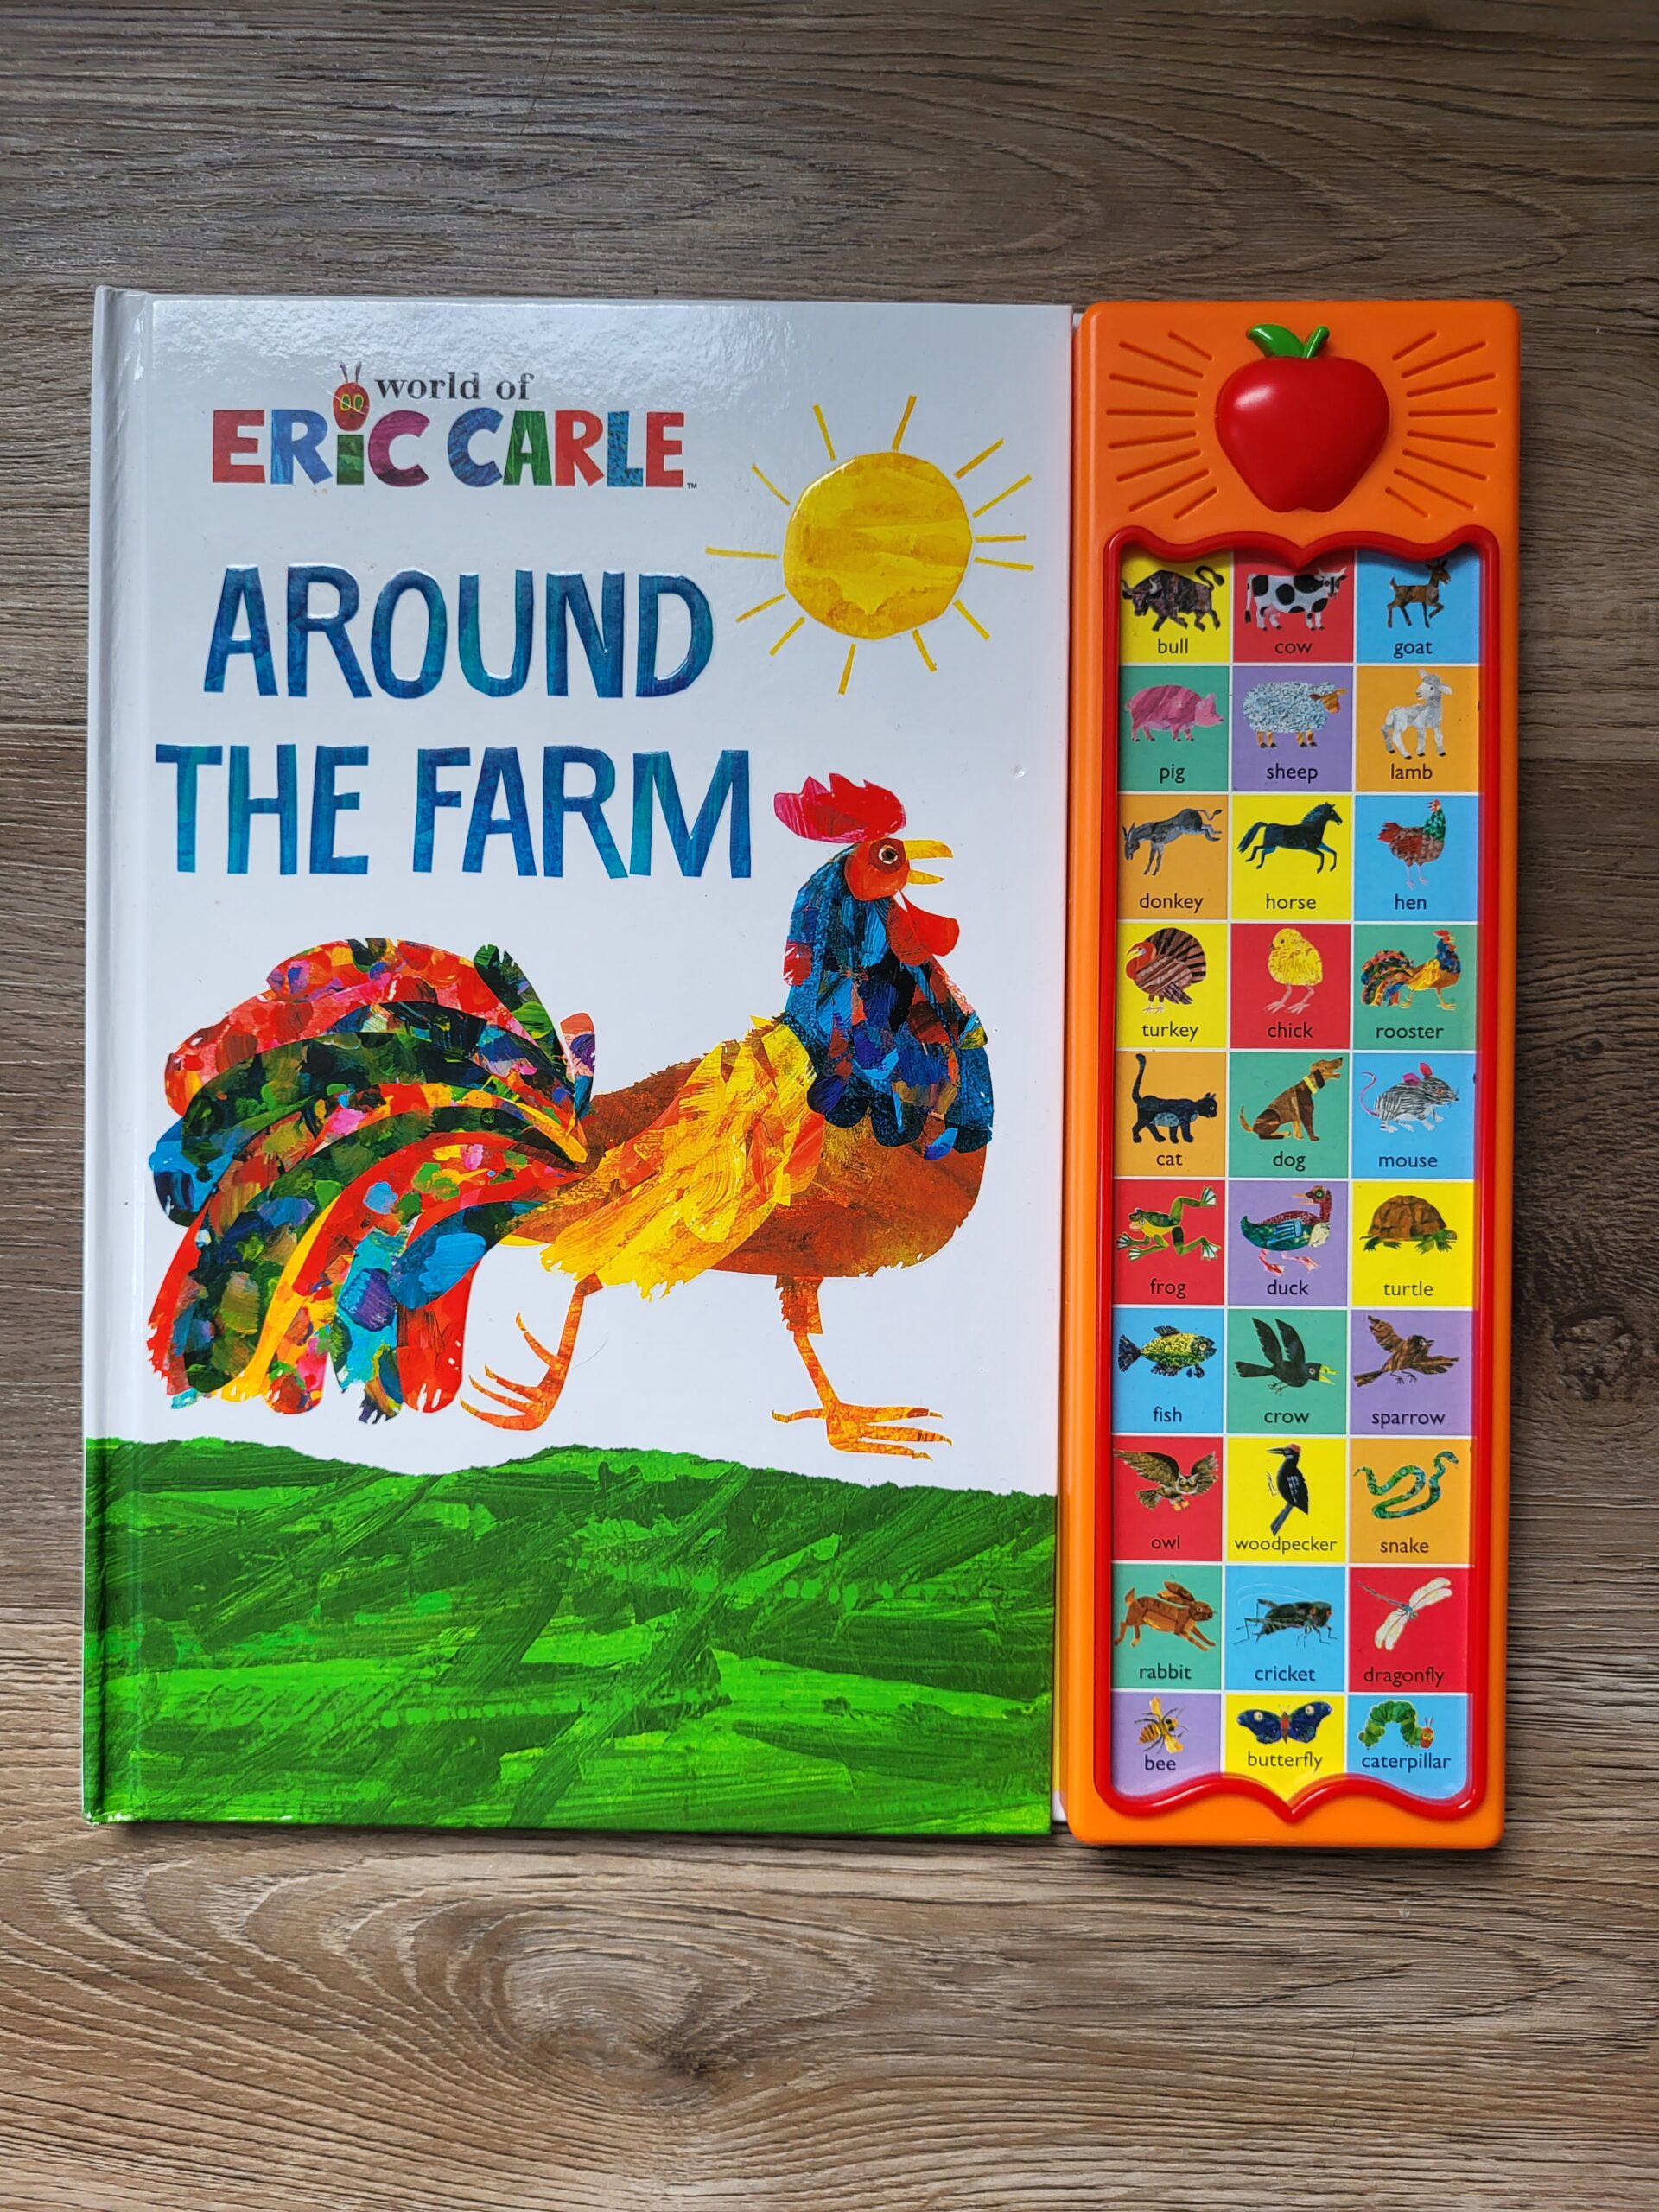 One of the 10 best interactive board books for toddlers.